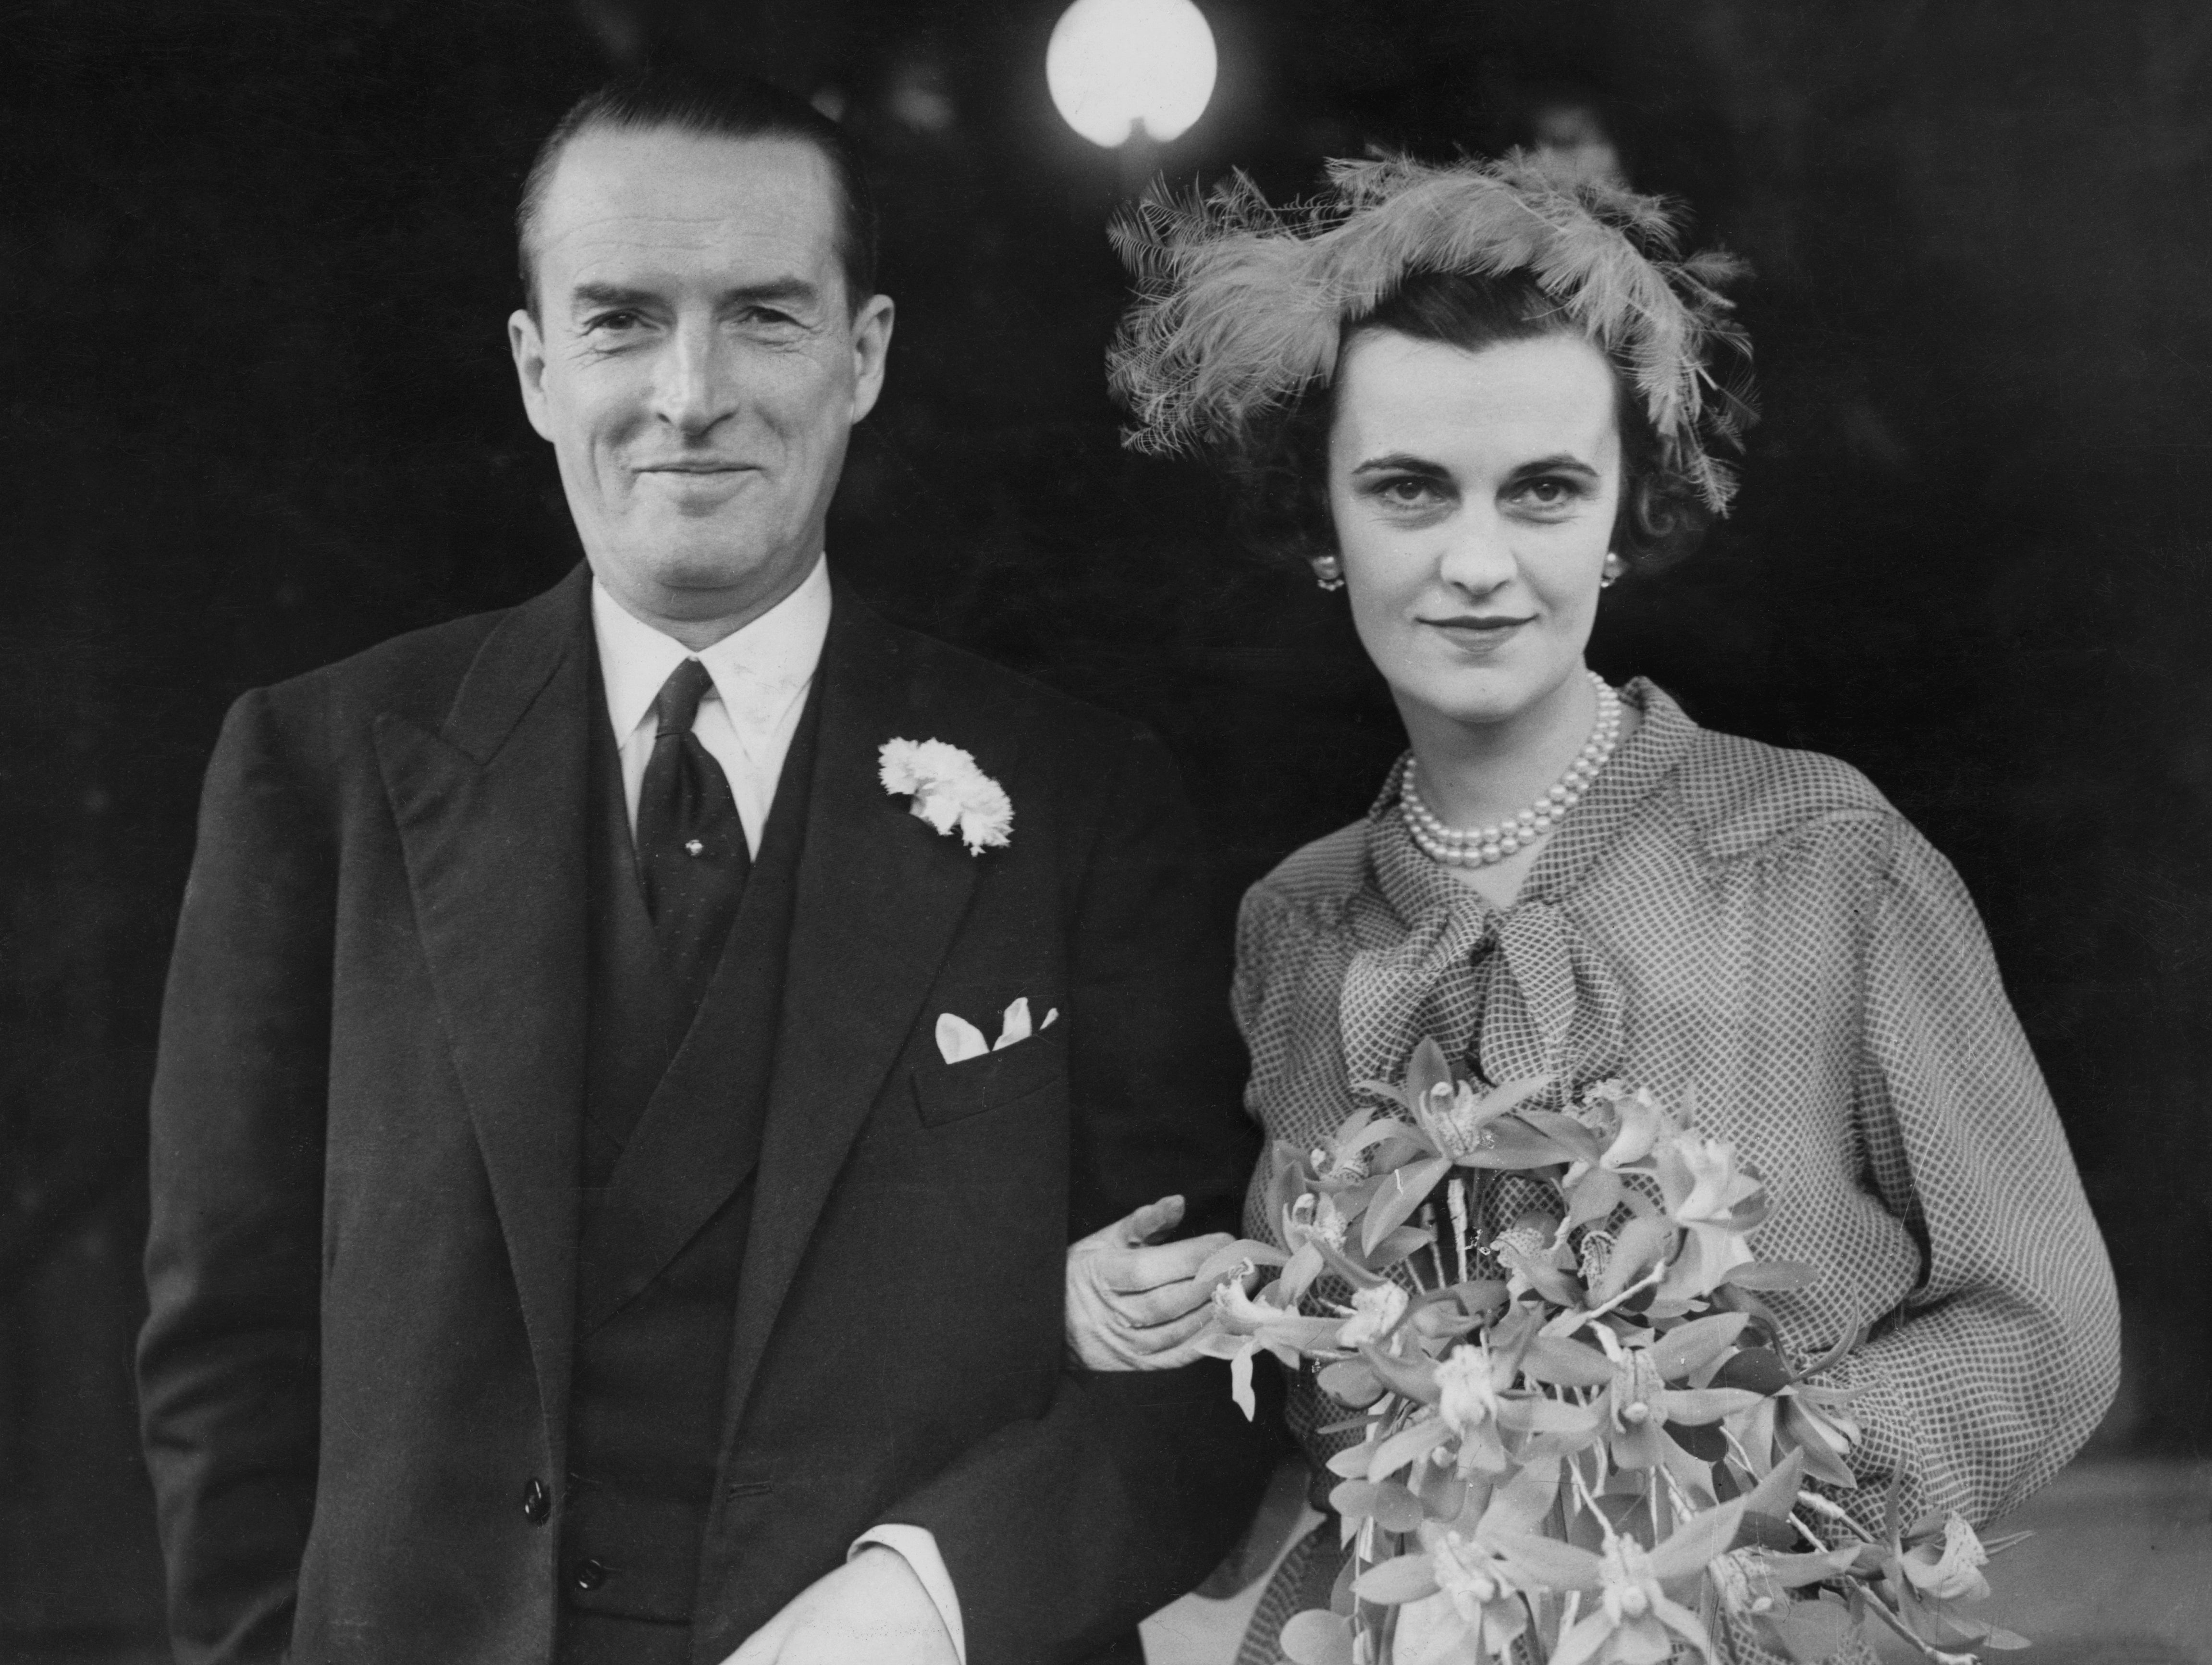 The Duke and Duchess of Argyll after their wedding in 1951